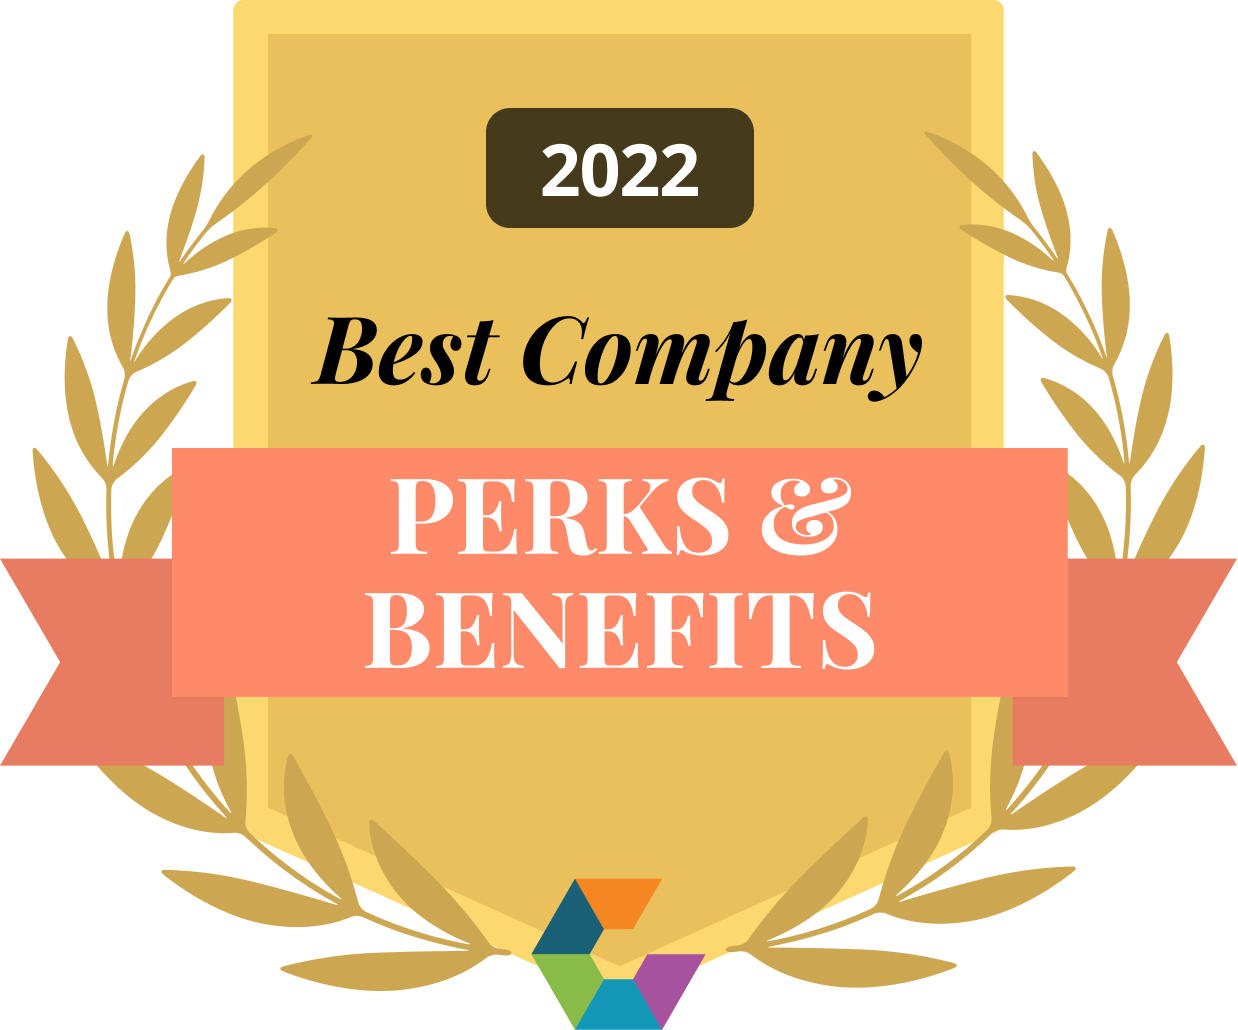 best company for perks and benefits award